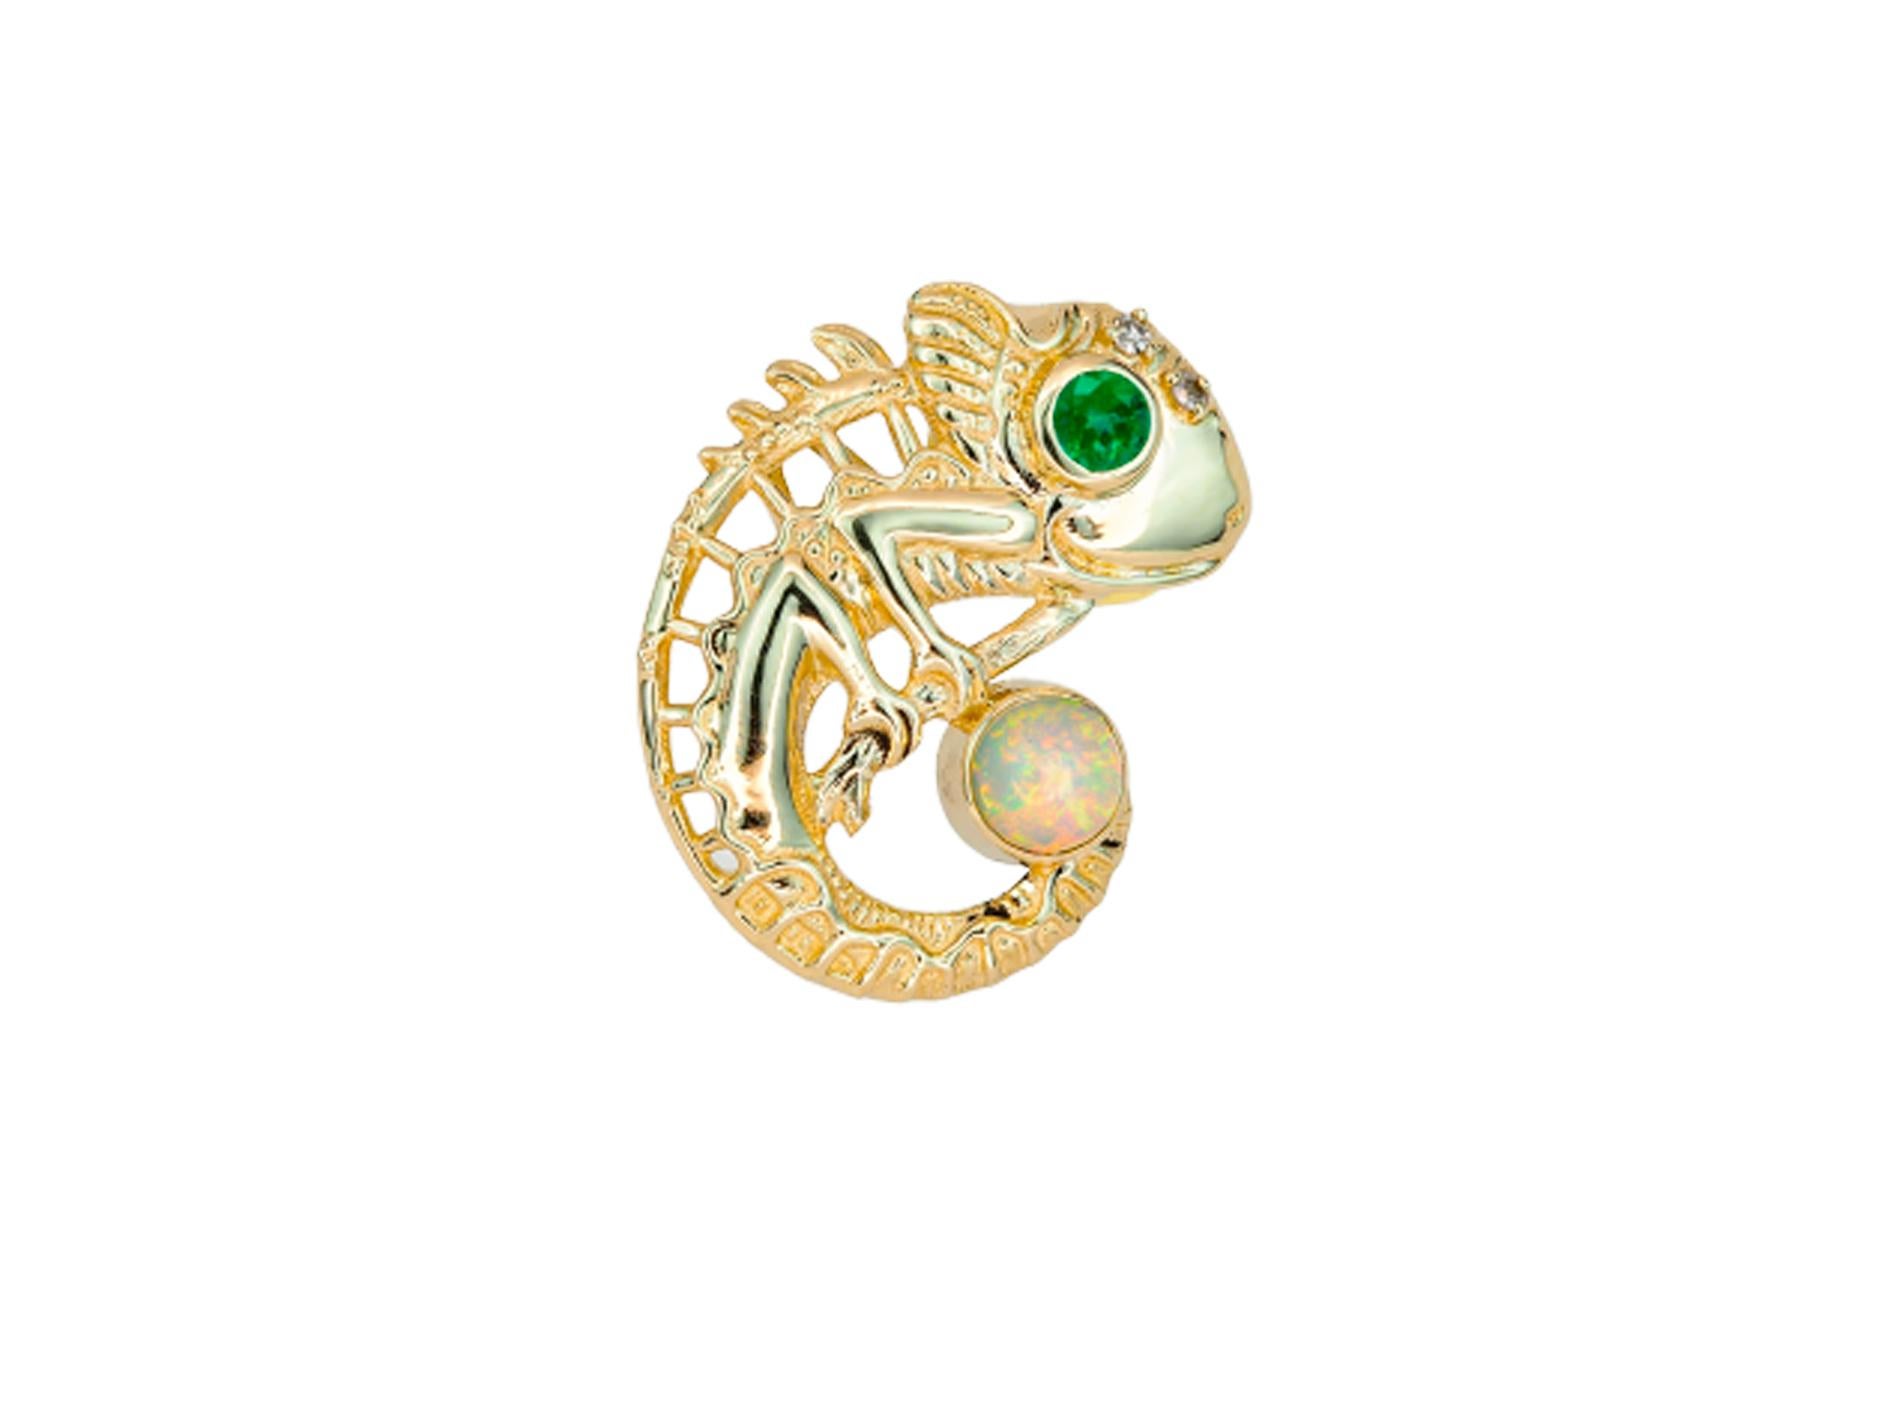 14k Gold Pendant with Opal, Emerald and Diamonds, Chameleon Pendant! For Sale 5